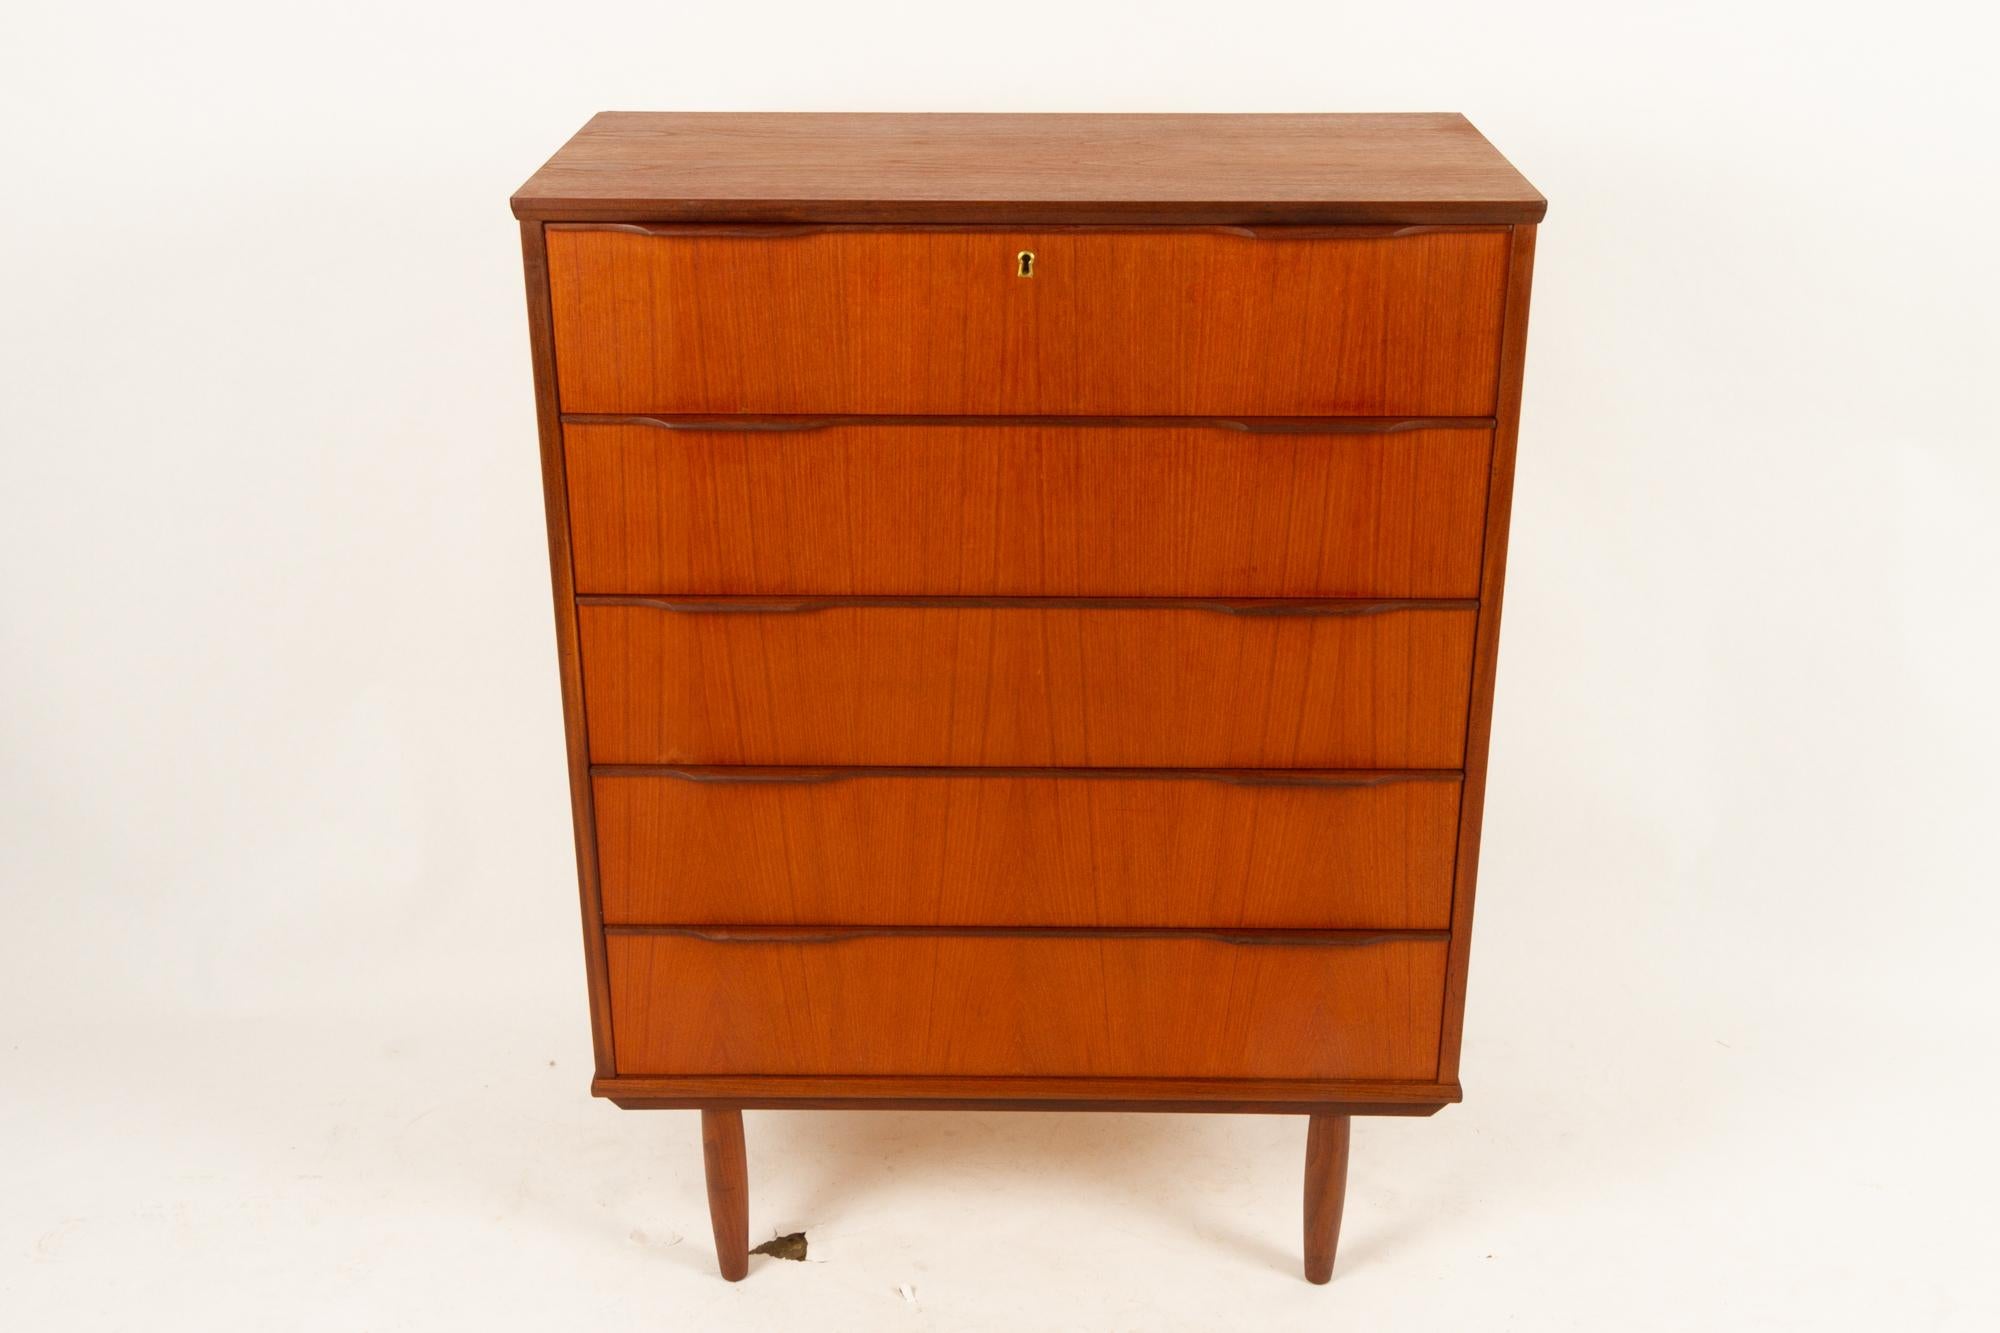 Danish teak dresser 1960s
Tall teak dresser with five large drawers. Top drawer with lock and key.
Long sculpted grips in solid teak. Round tapered legs in solid teak.
Beautiful veneer pattern on drawer fronts.
Very good vintage condition.